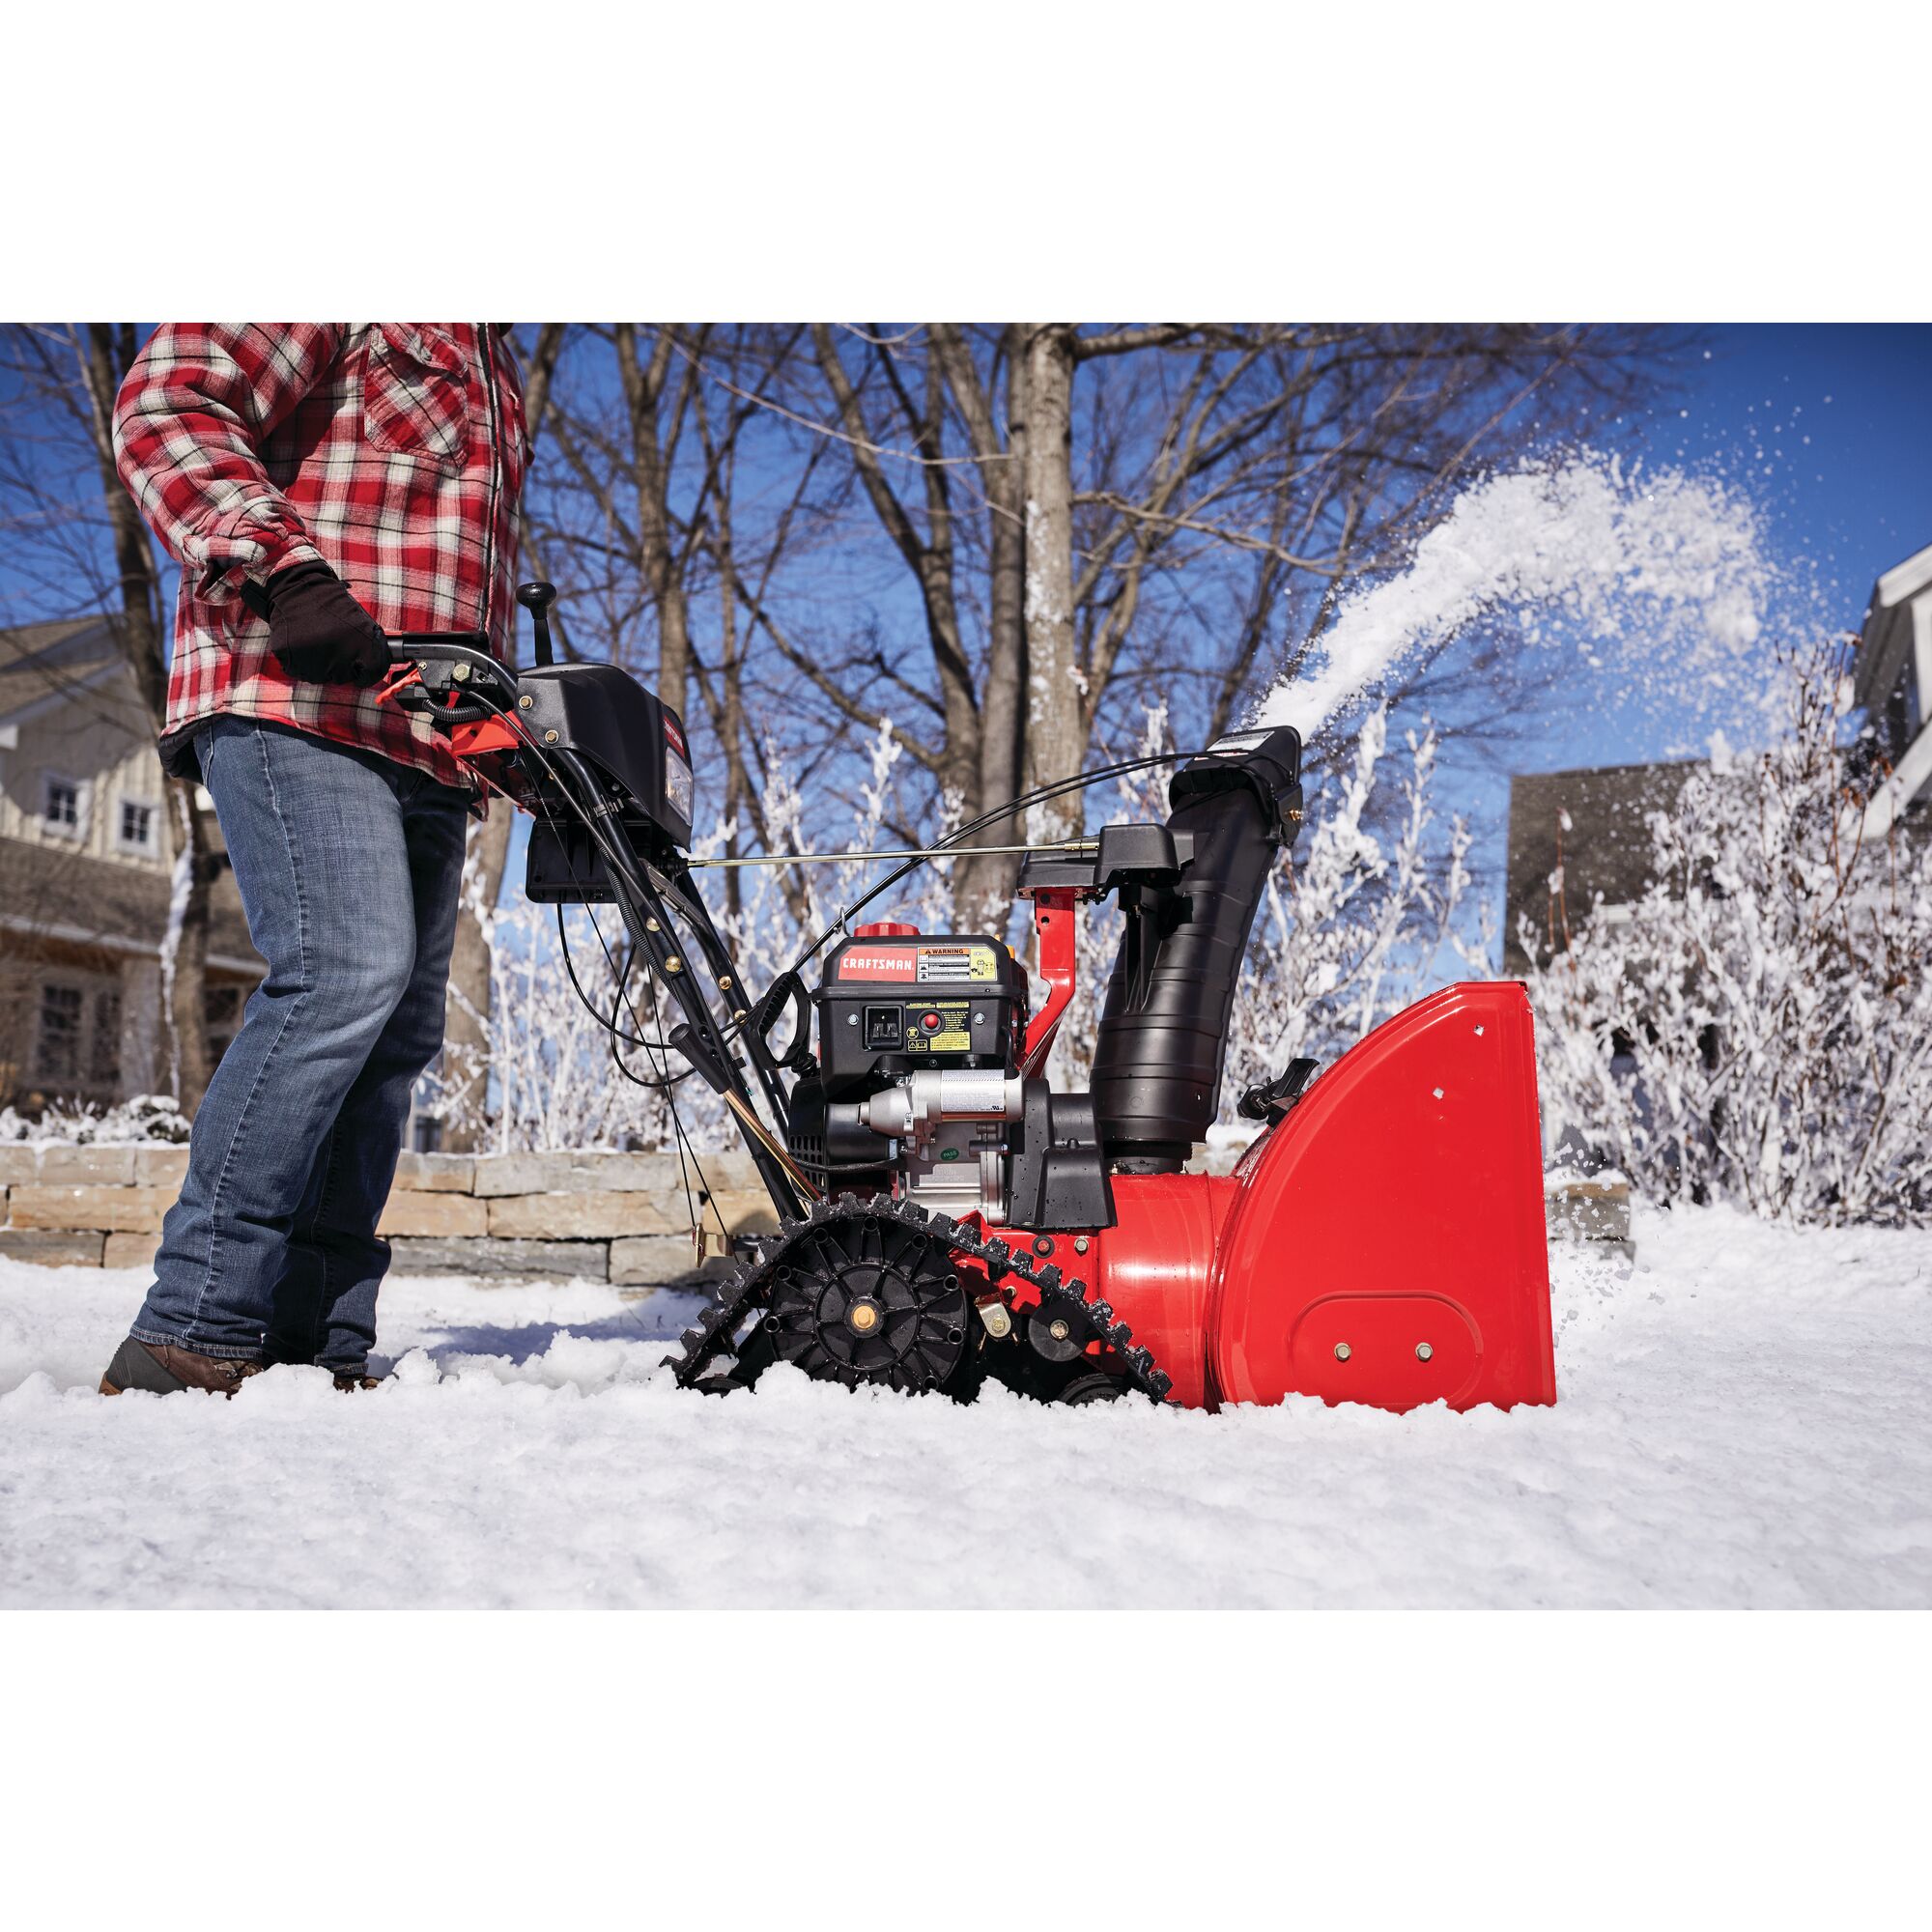 CRAFTSMAN 208CC Electric Start Track Drive Snow Blower blowing snow in the yard in side view in plaid shirt and jeans